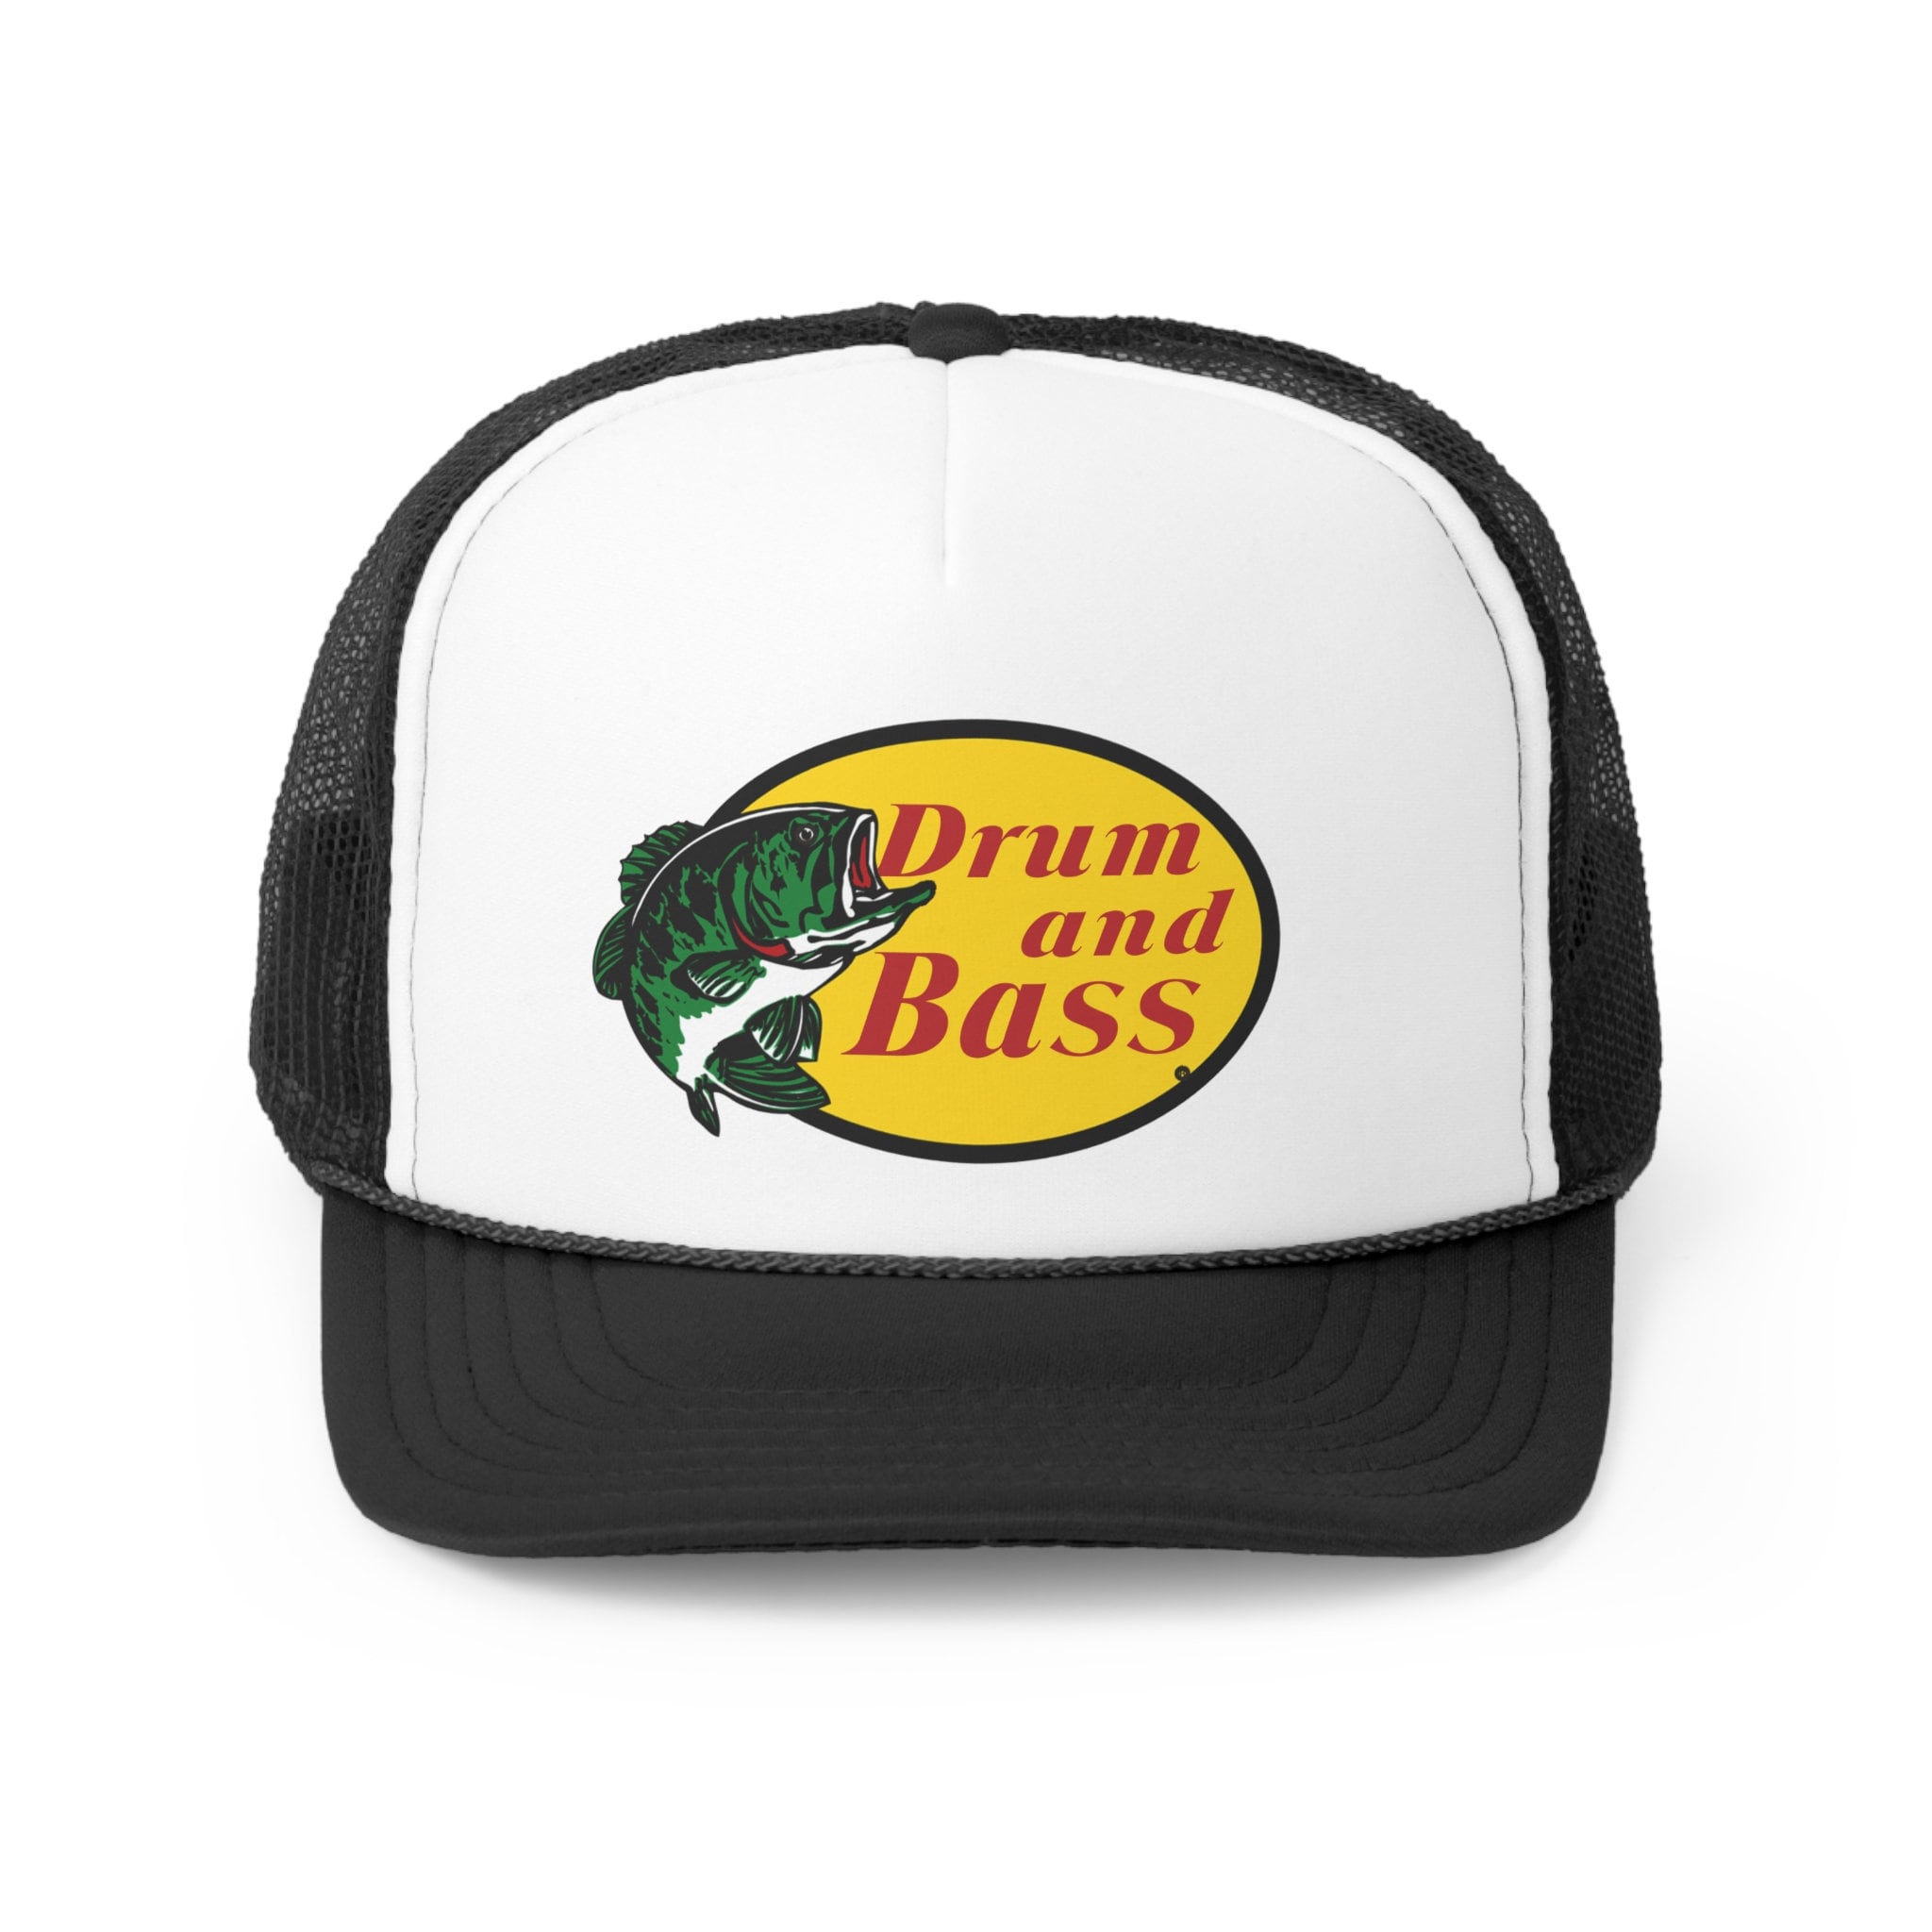 Drum and Bass Pro Trucker Hat, Drum and Bass, Rave Hat, Festival Hat, Edm Hat, DJ Merch